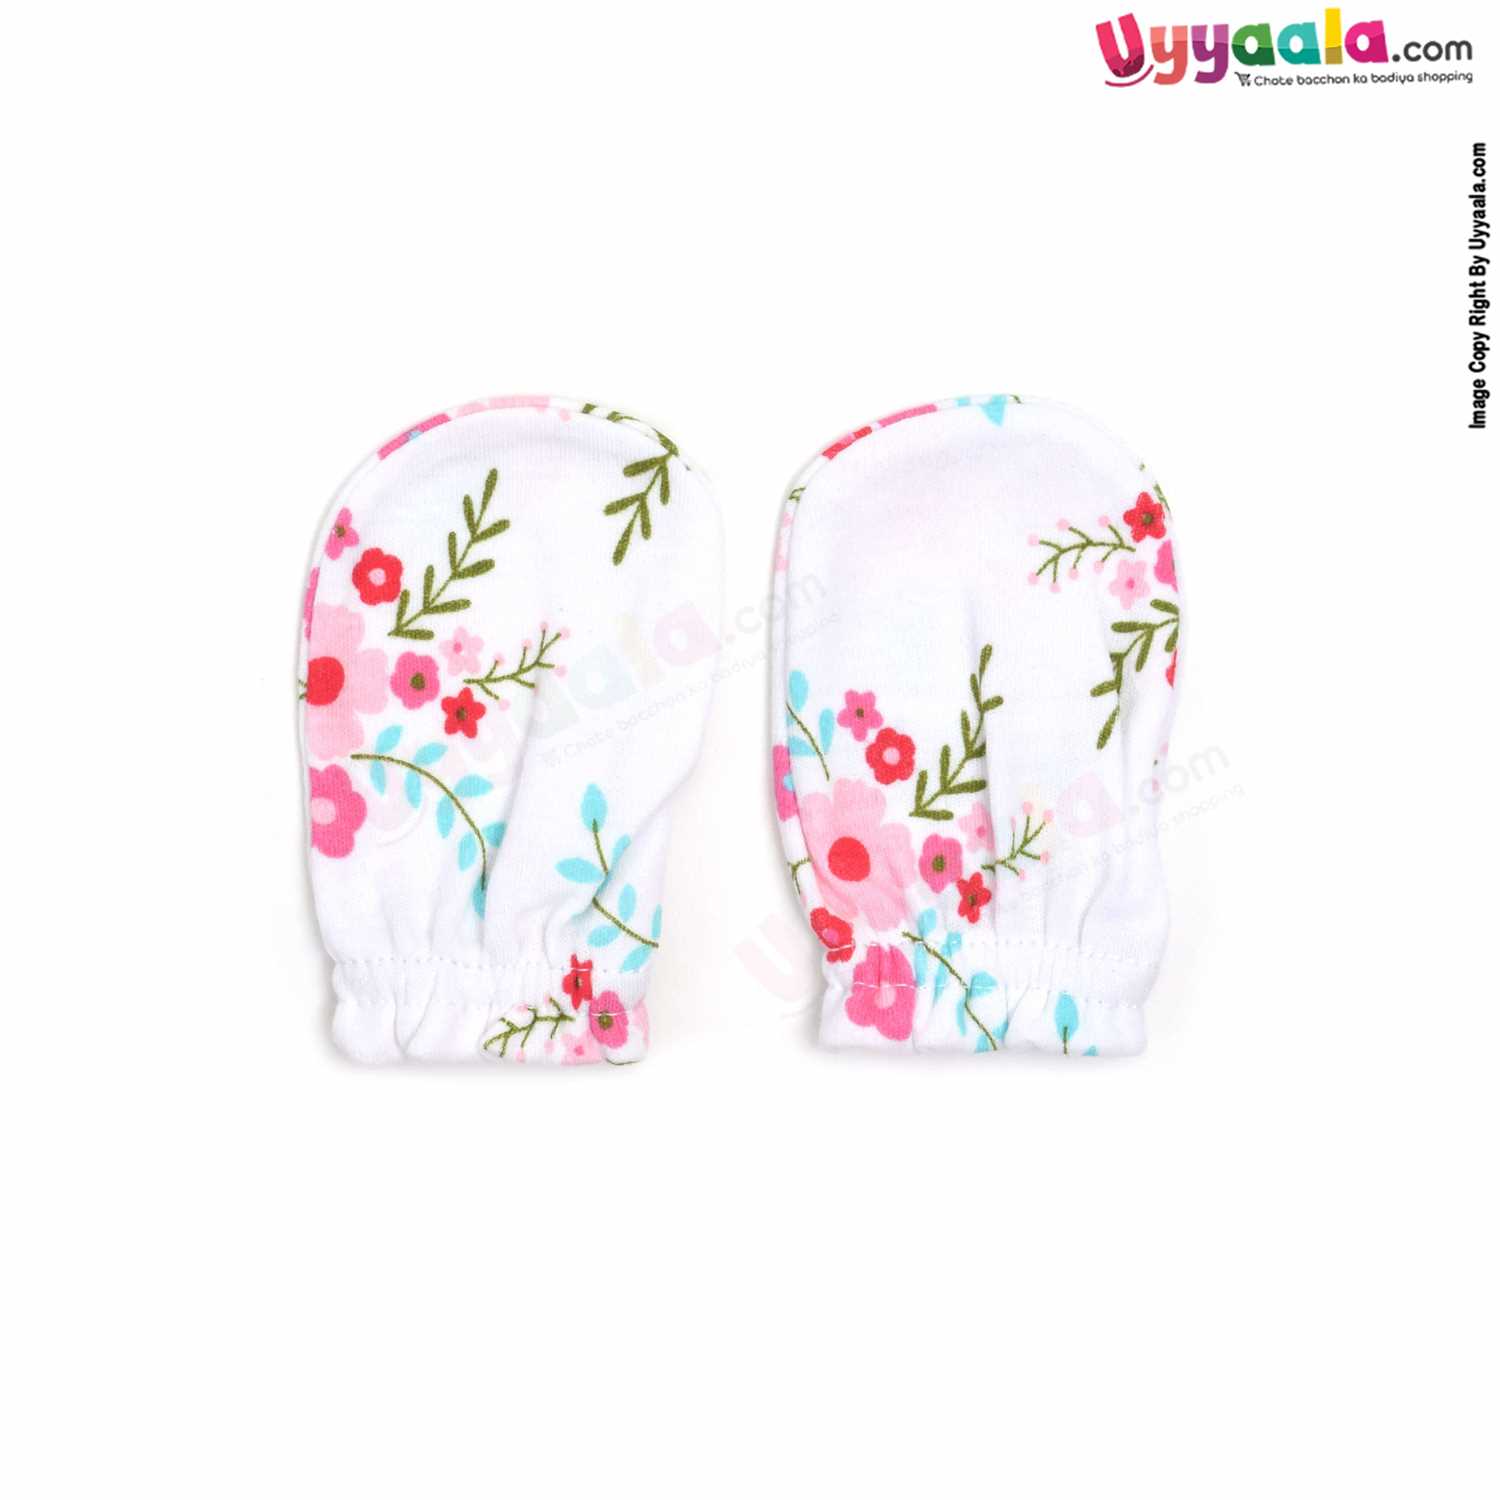 LUVABLE FRIENDS Hosiery Cotton Mittens 4p Set for Babies with Multi Print,0-6 Age - Multi Color